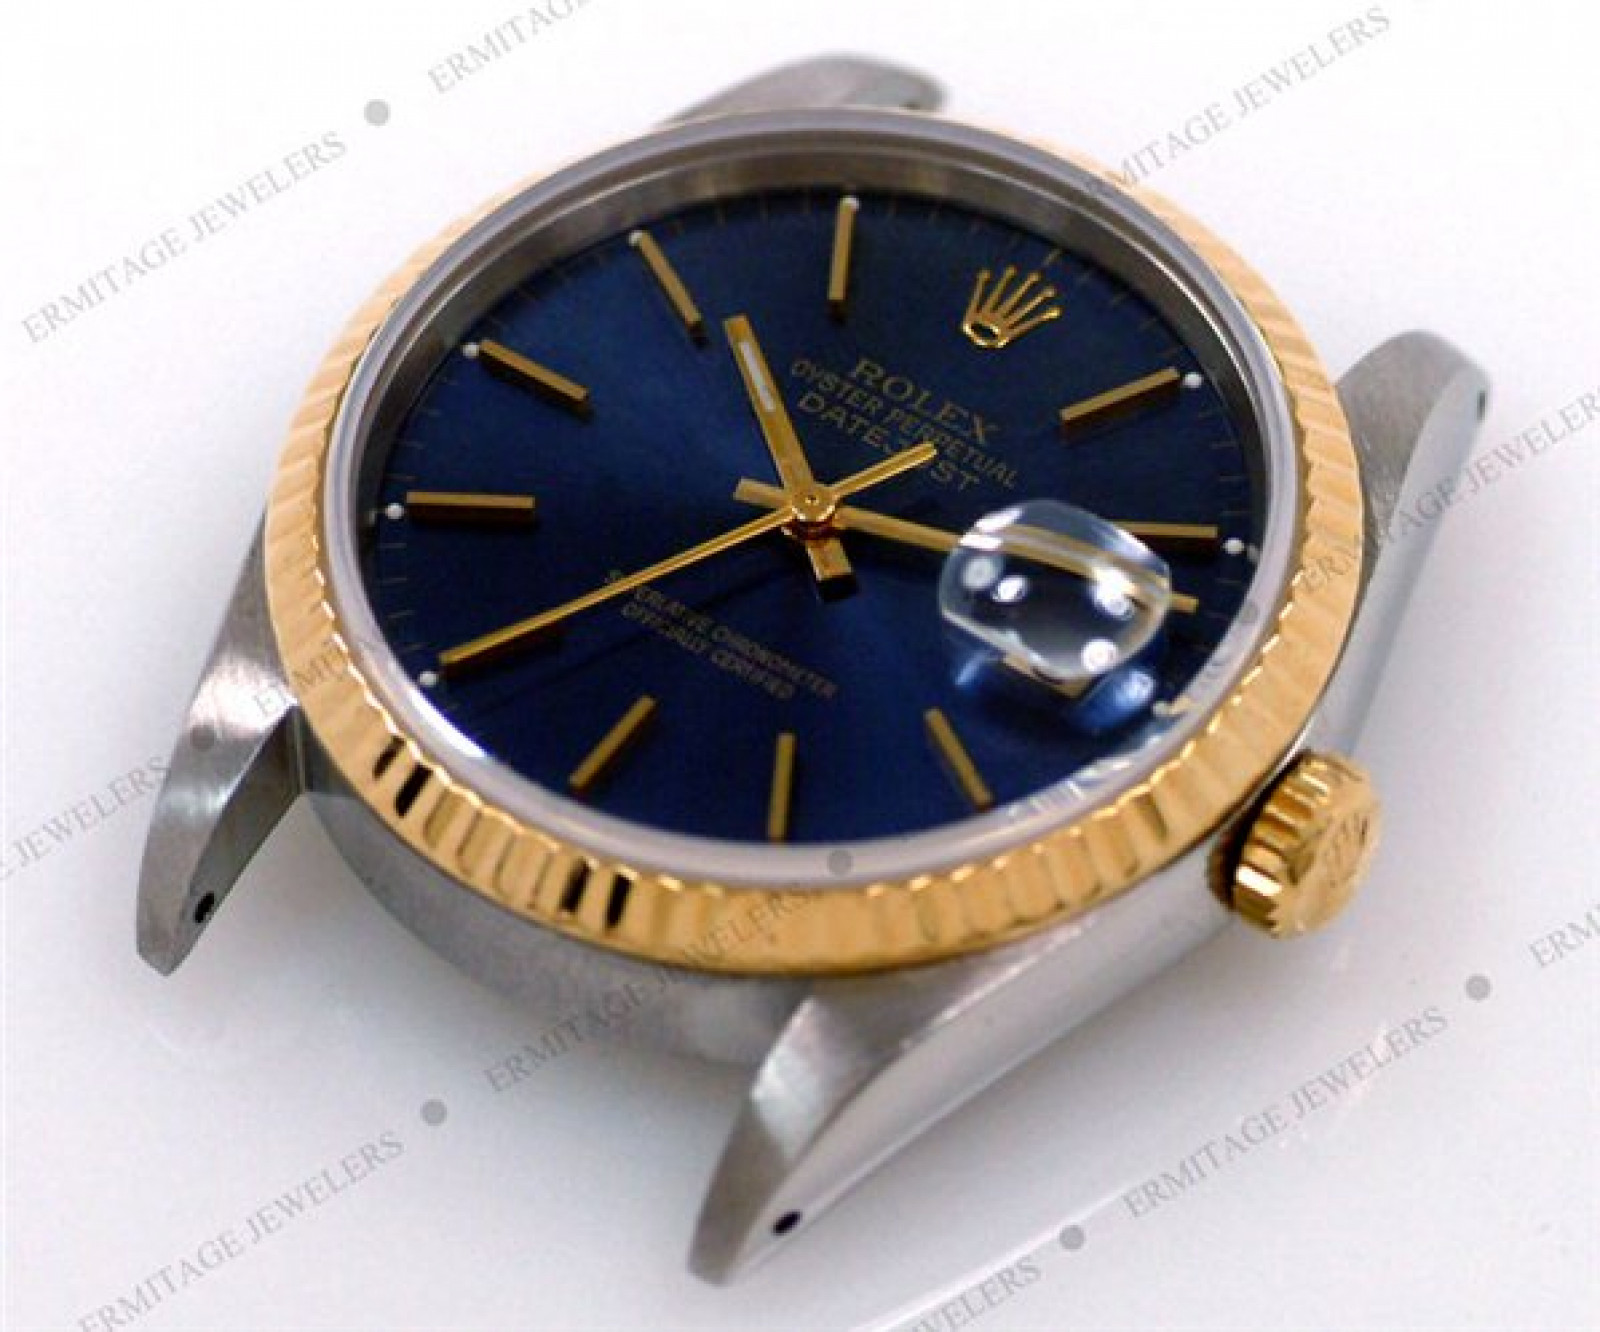 Sell Rolex Datejust 16233 Now